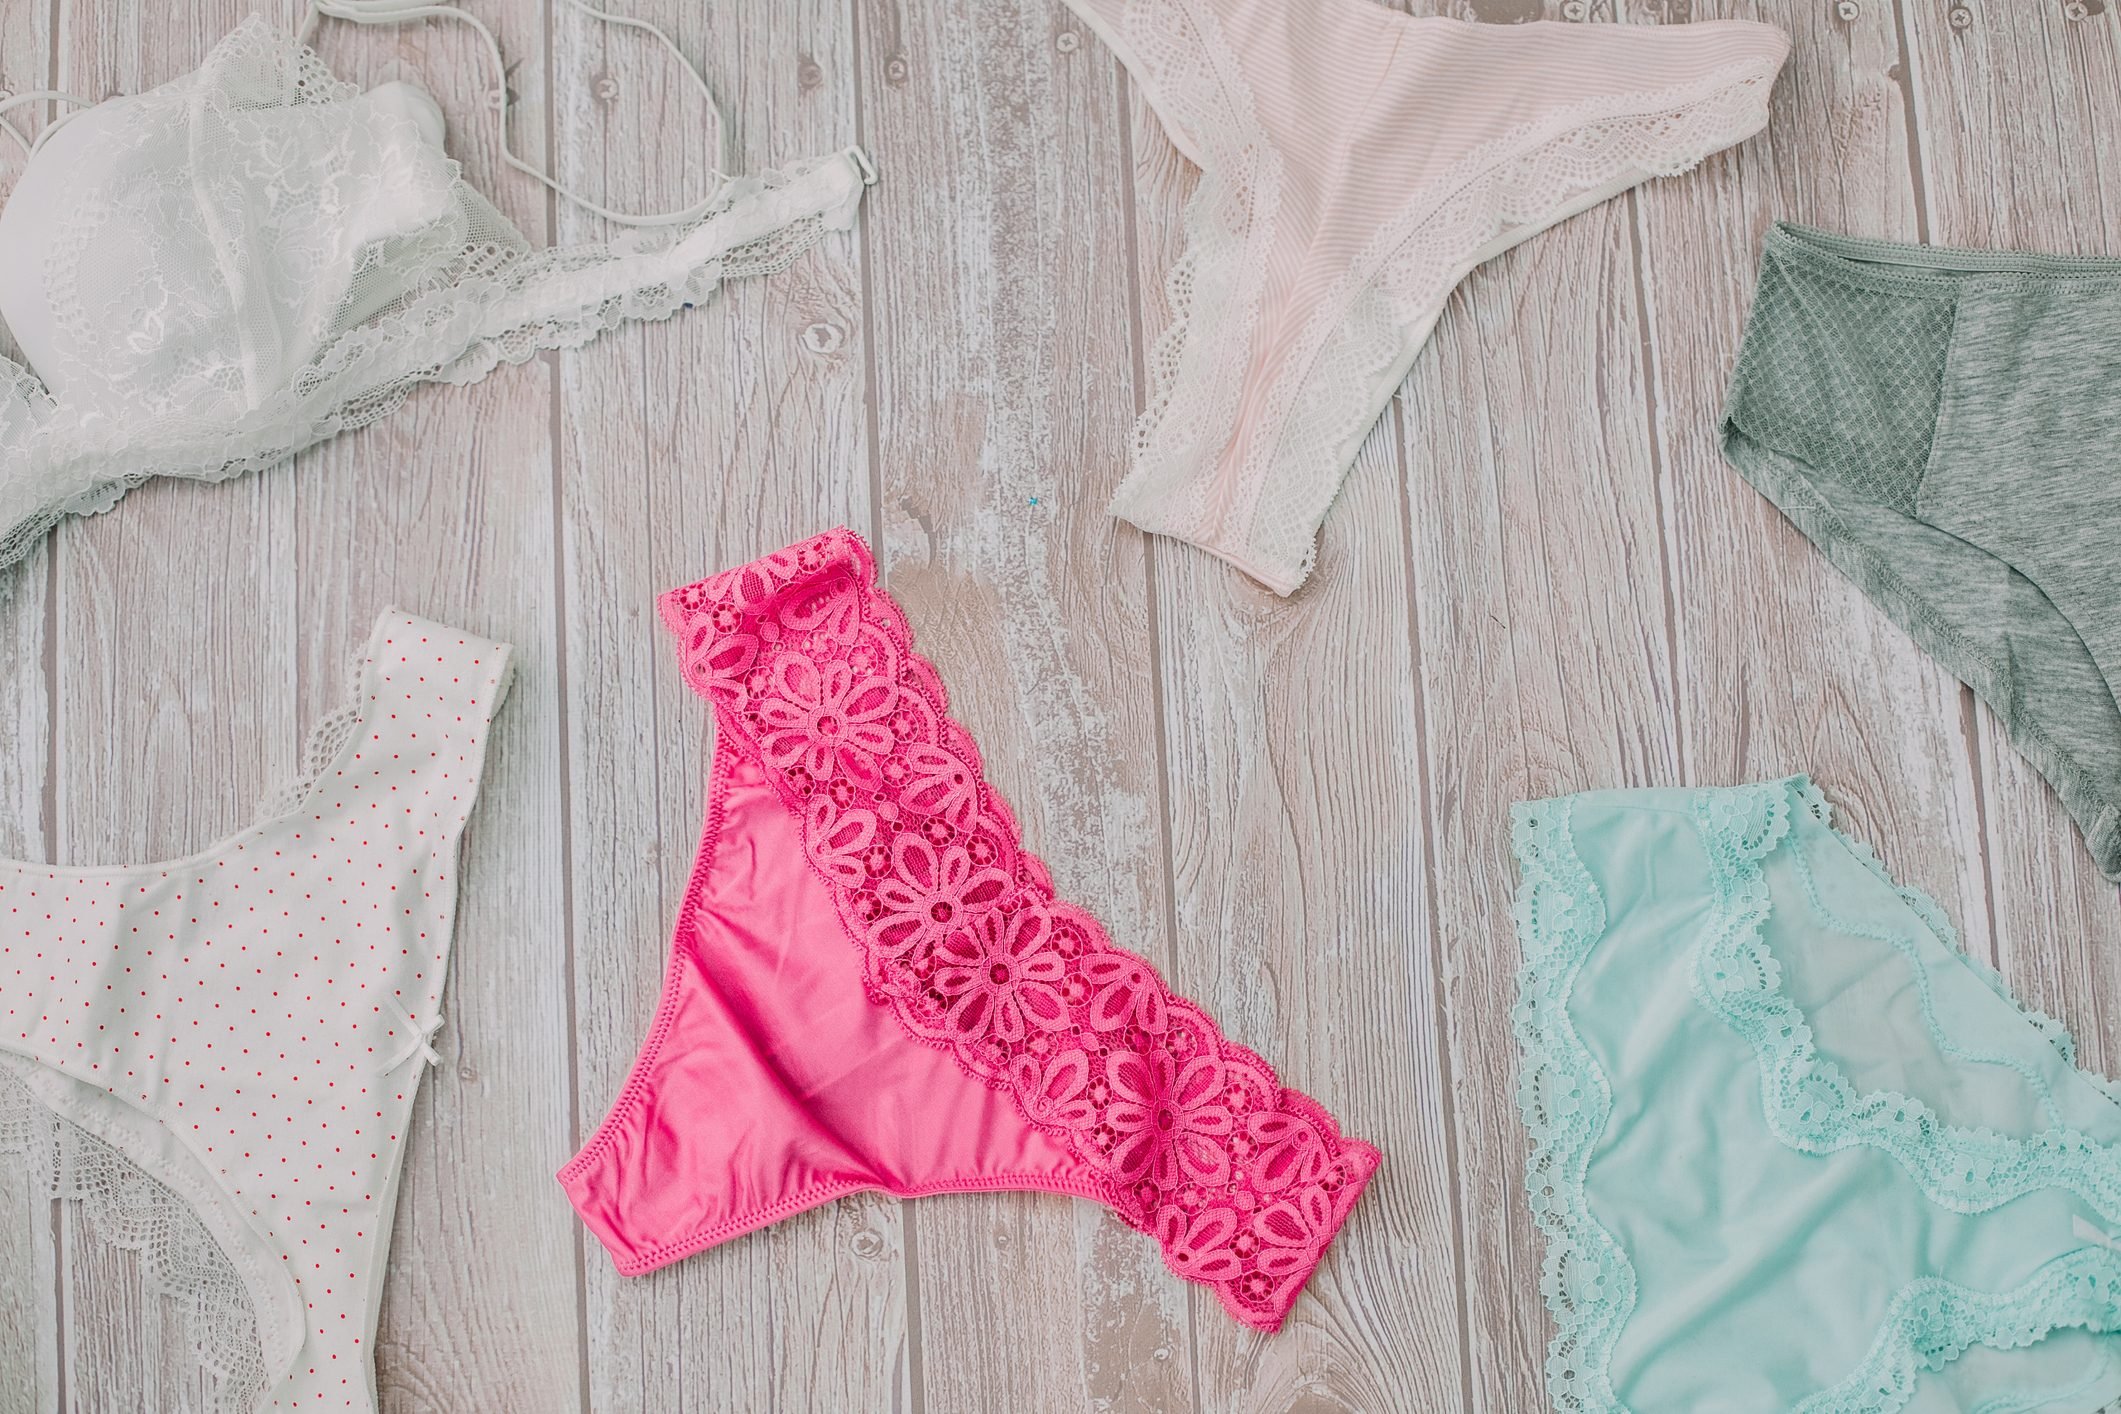 8 Underwear Mistakes That Can Mess With Your Health The HealthyReaders Digest picture photo